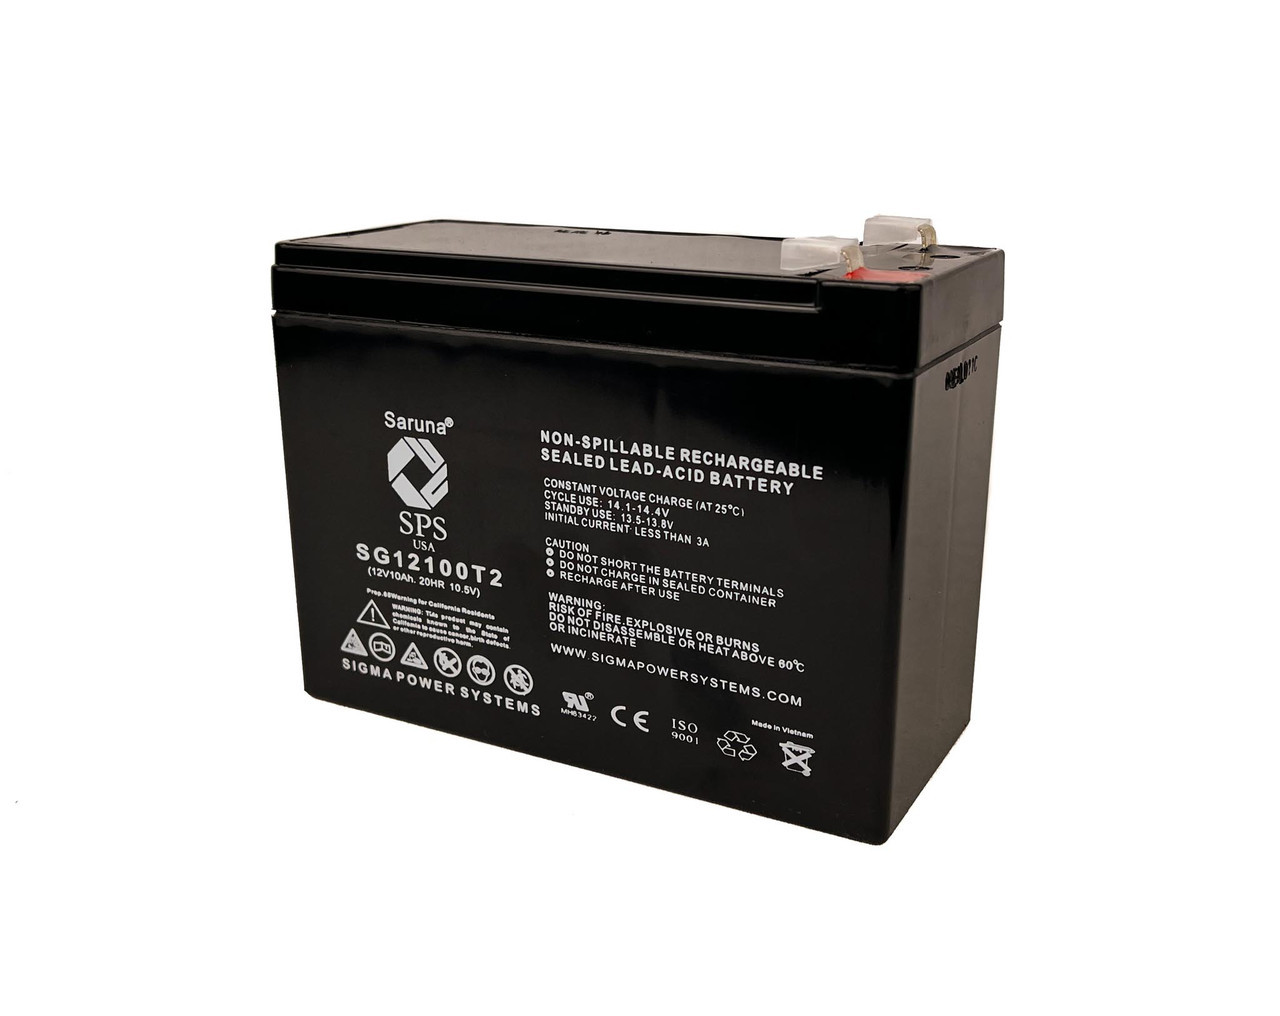 Raion Power 12V 10Ah Non-Spillable Replacement Rechargebale Battery for FirstPower FP12100A